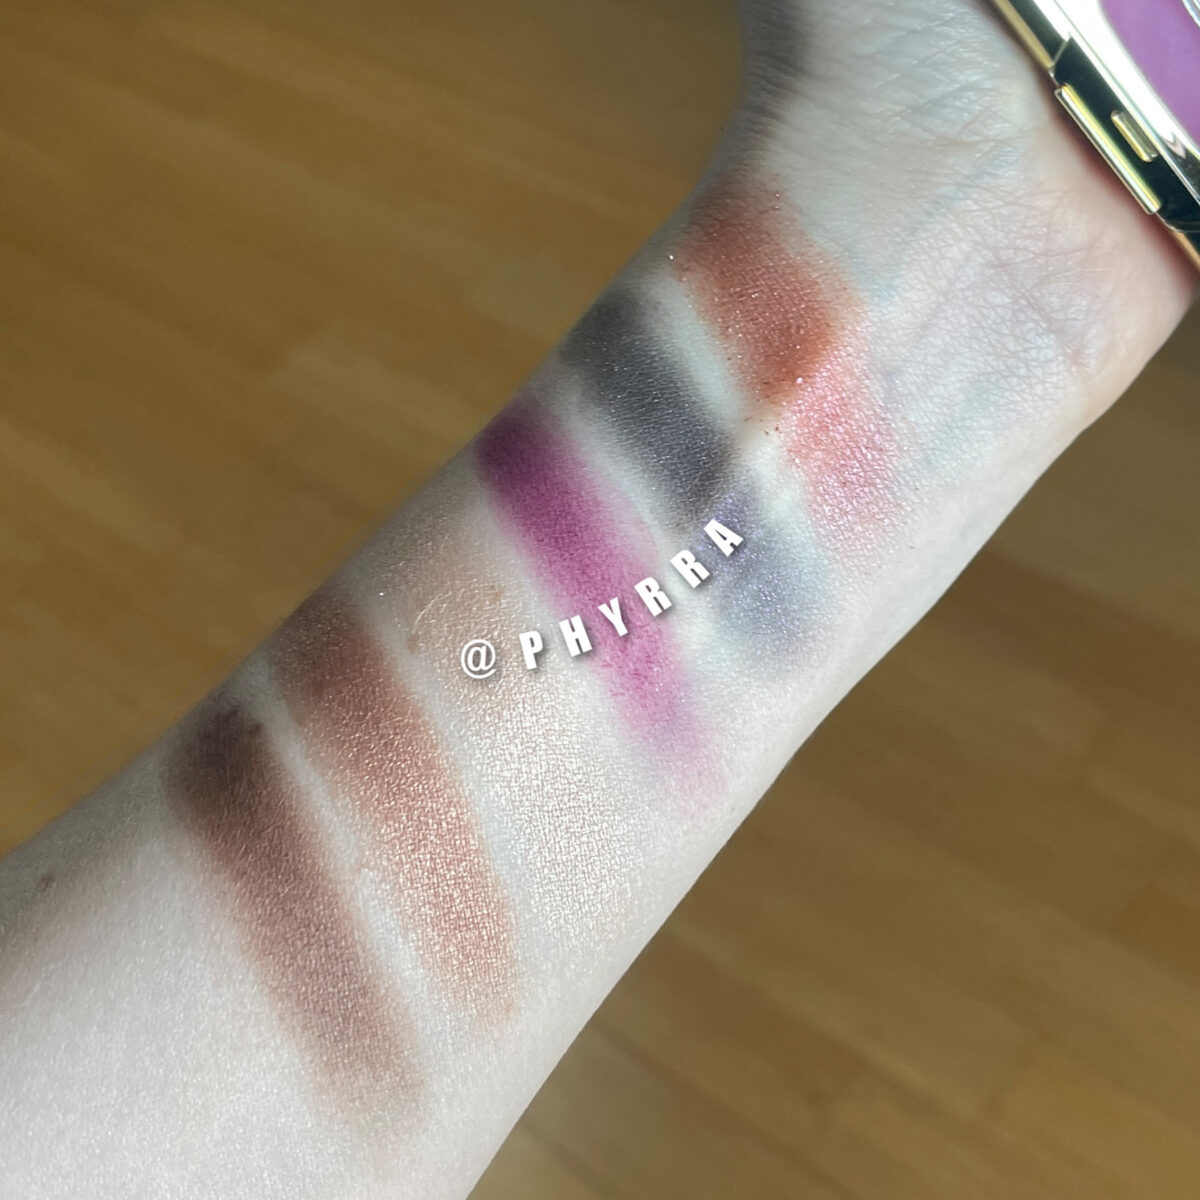 Tarte Big Ego to Go Palette Pale Skin Swatches in Indoor Indirect Sunlight